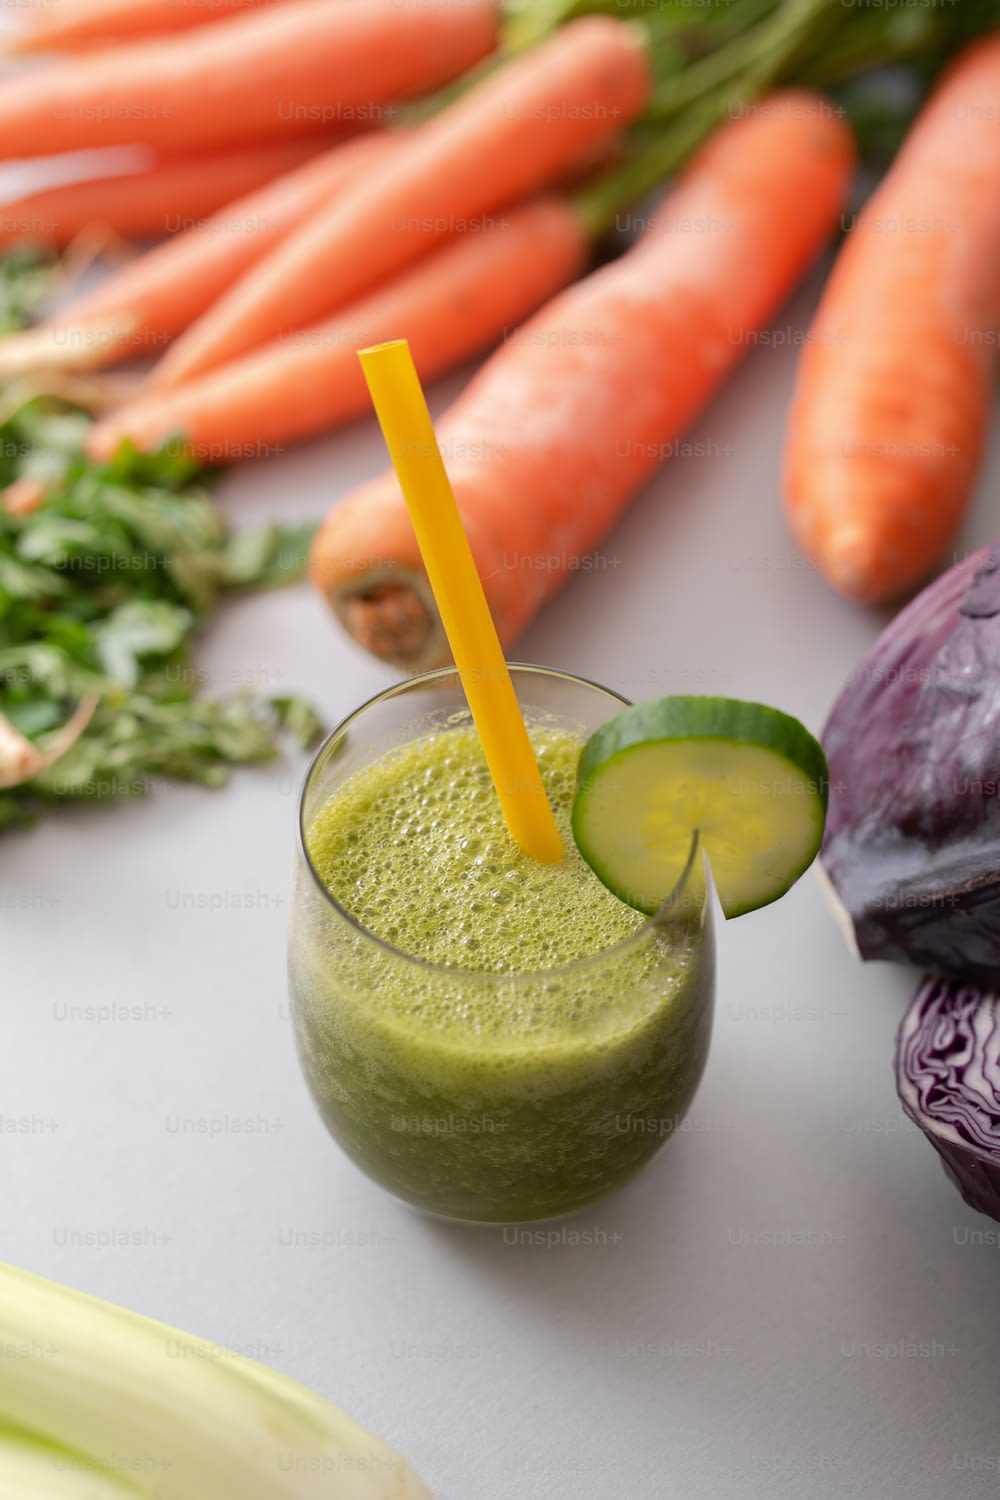 A green smoothie in glass with straw and cucumber and vegetagbles at background, detox, vegan, vegetarian healthy vegetable drink